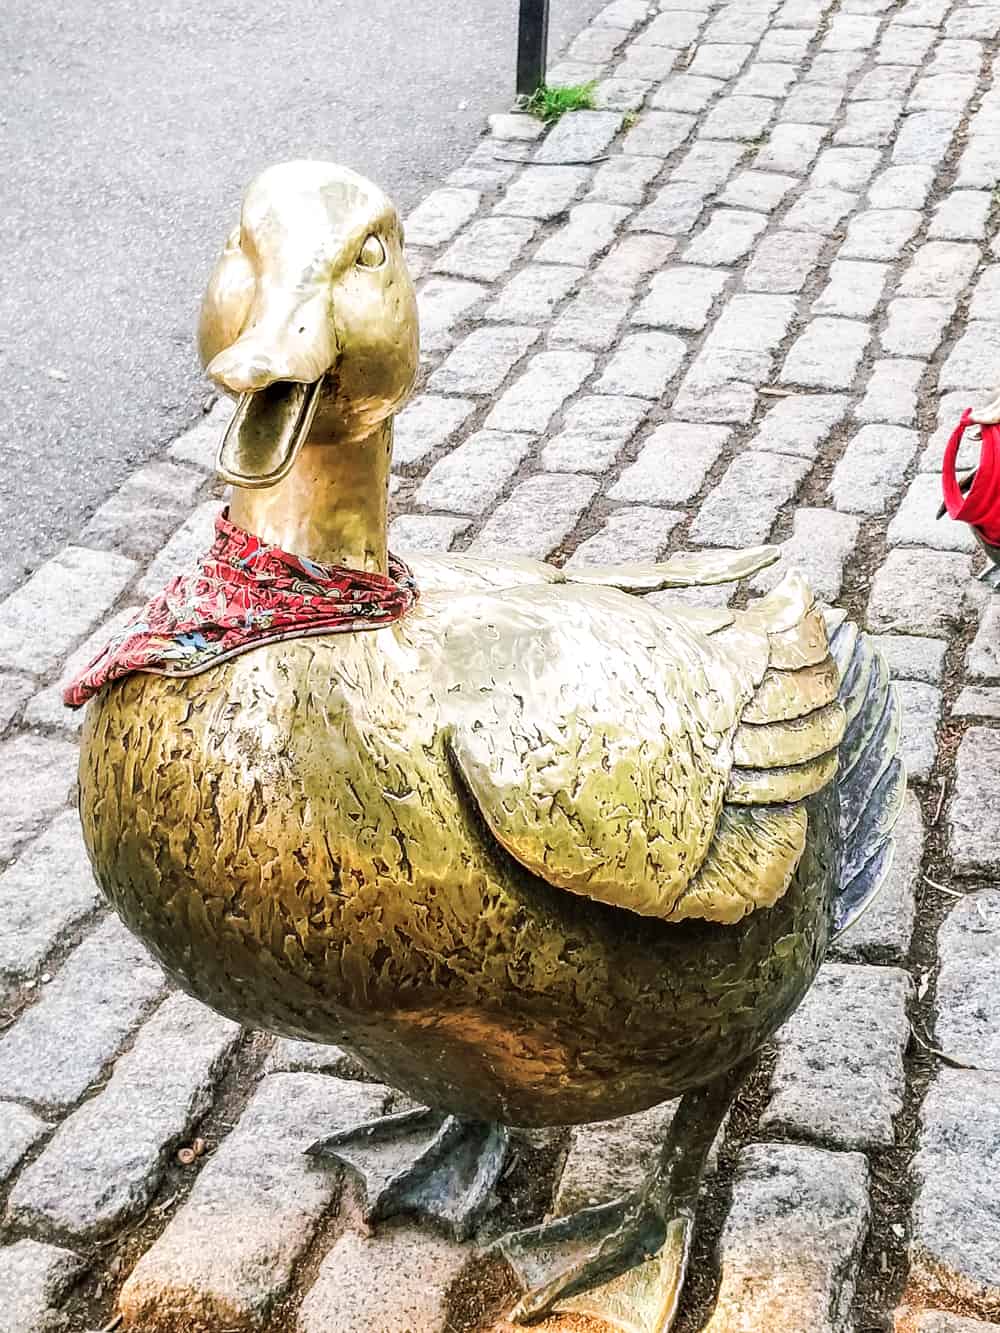 Mama duck in Make Way for Ducklings Statue